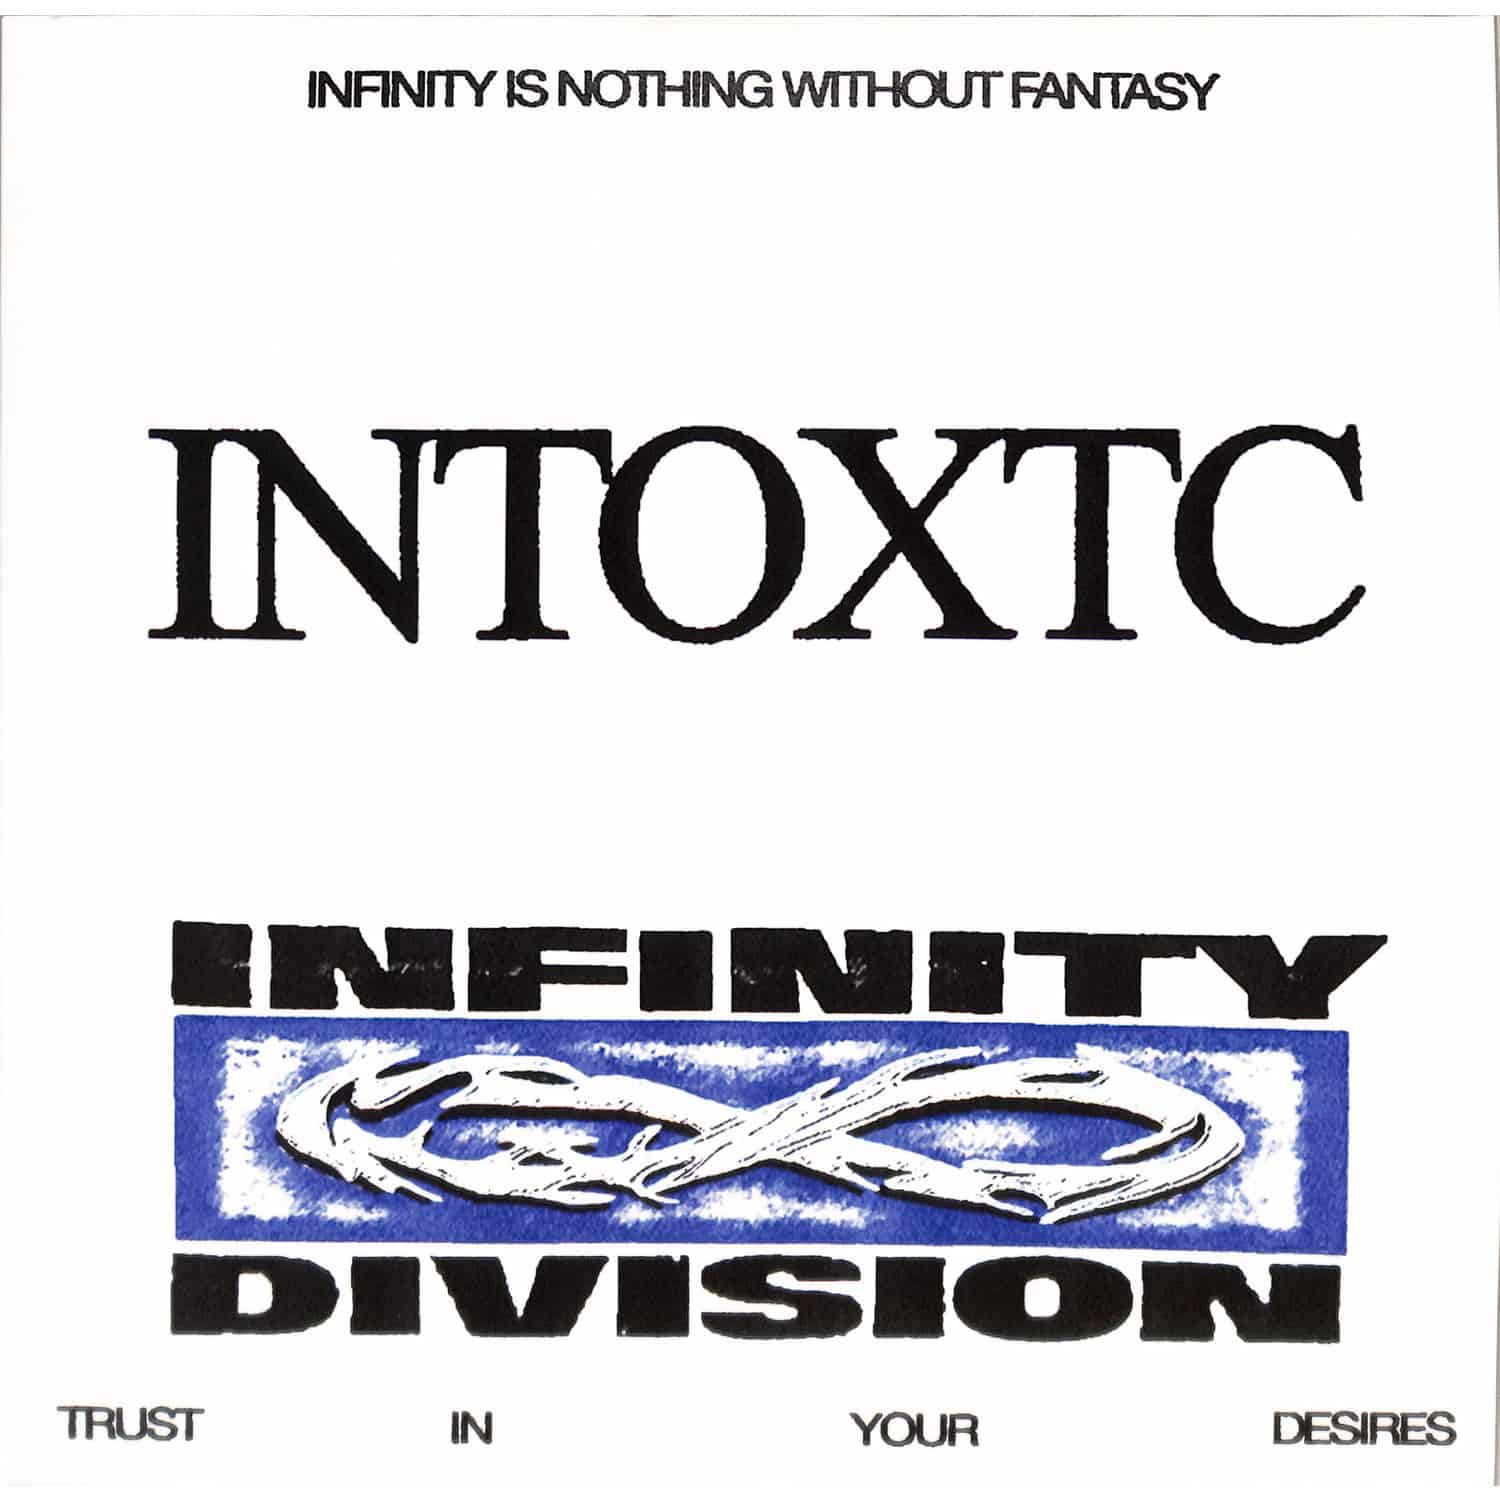 Infinity Division - INTOXTC